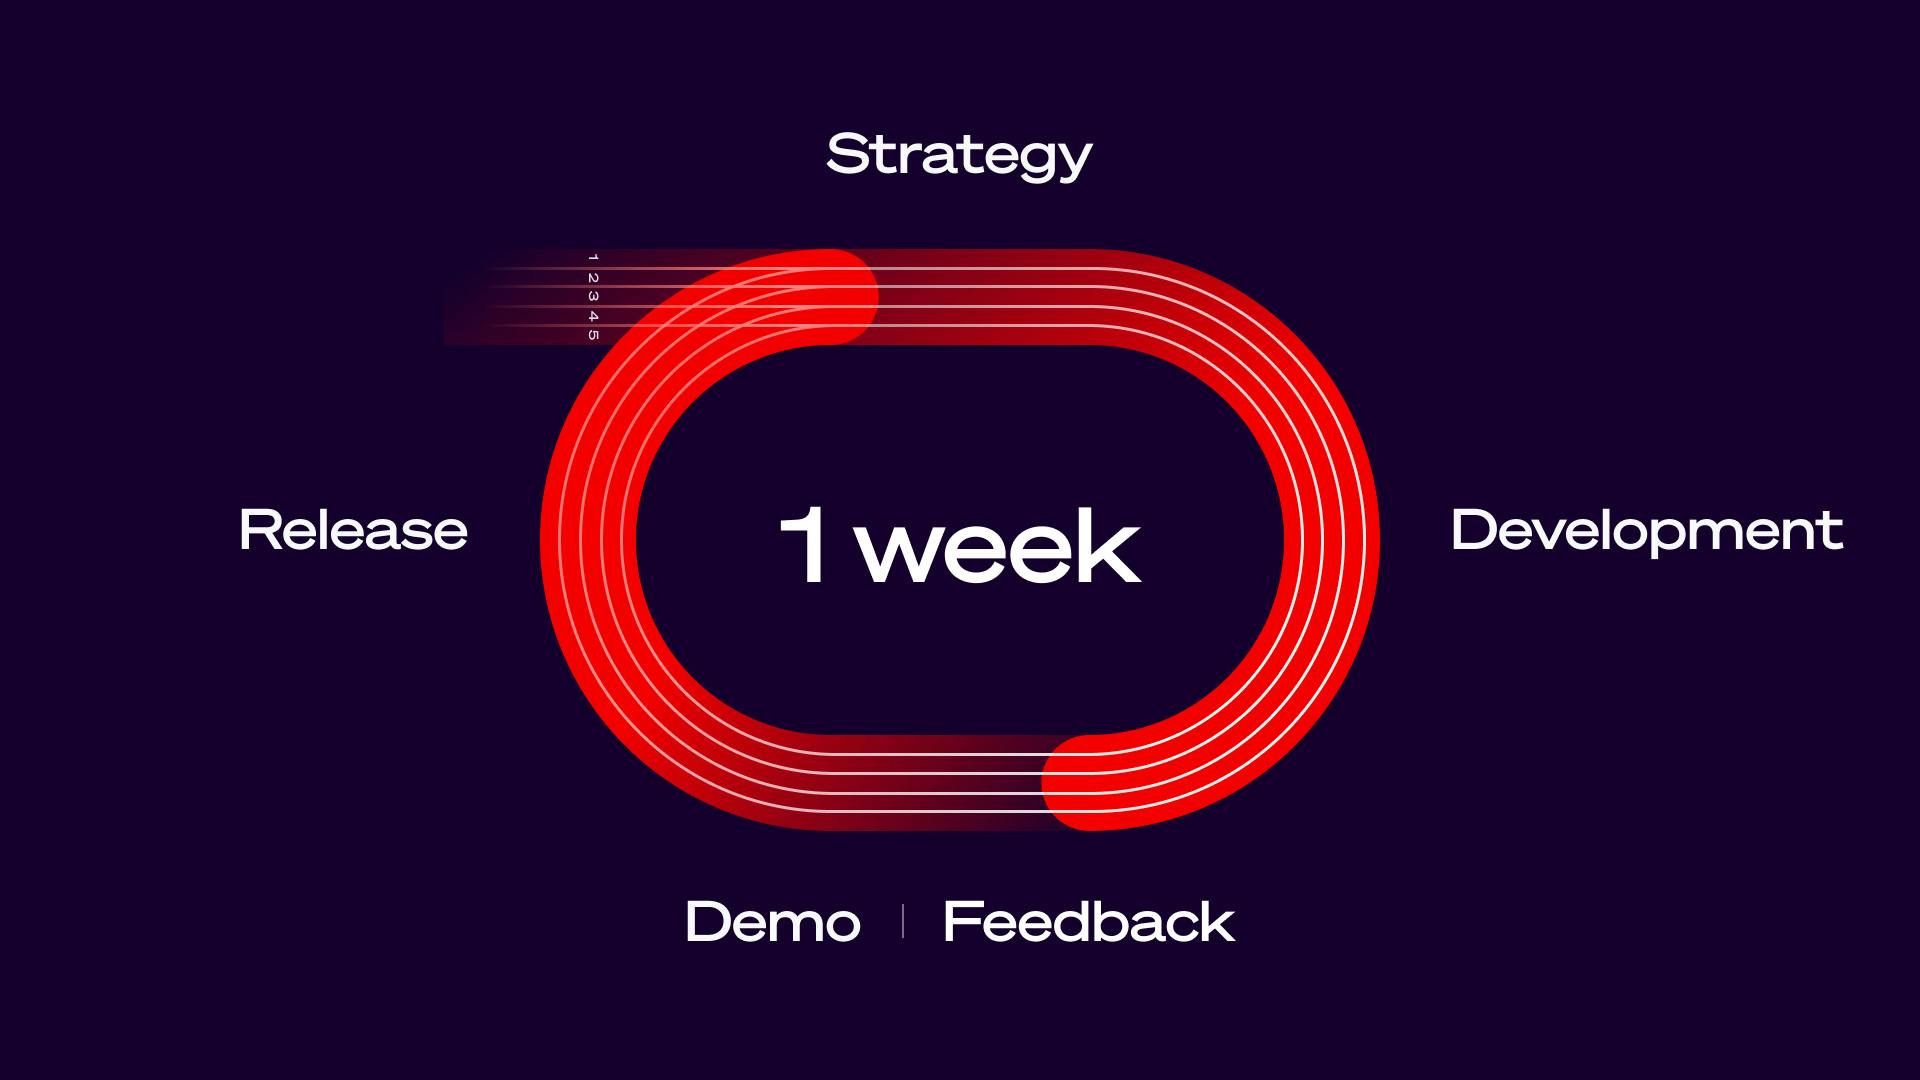 Sudolabs' one week software development cycles with frequent releases and instant feedback